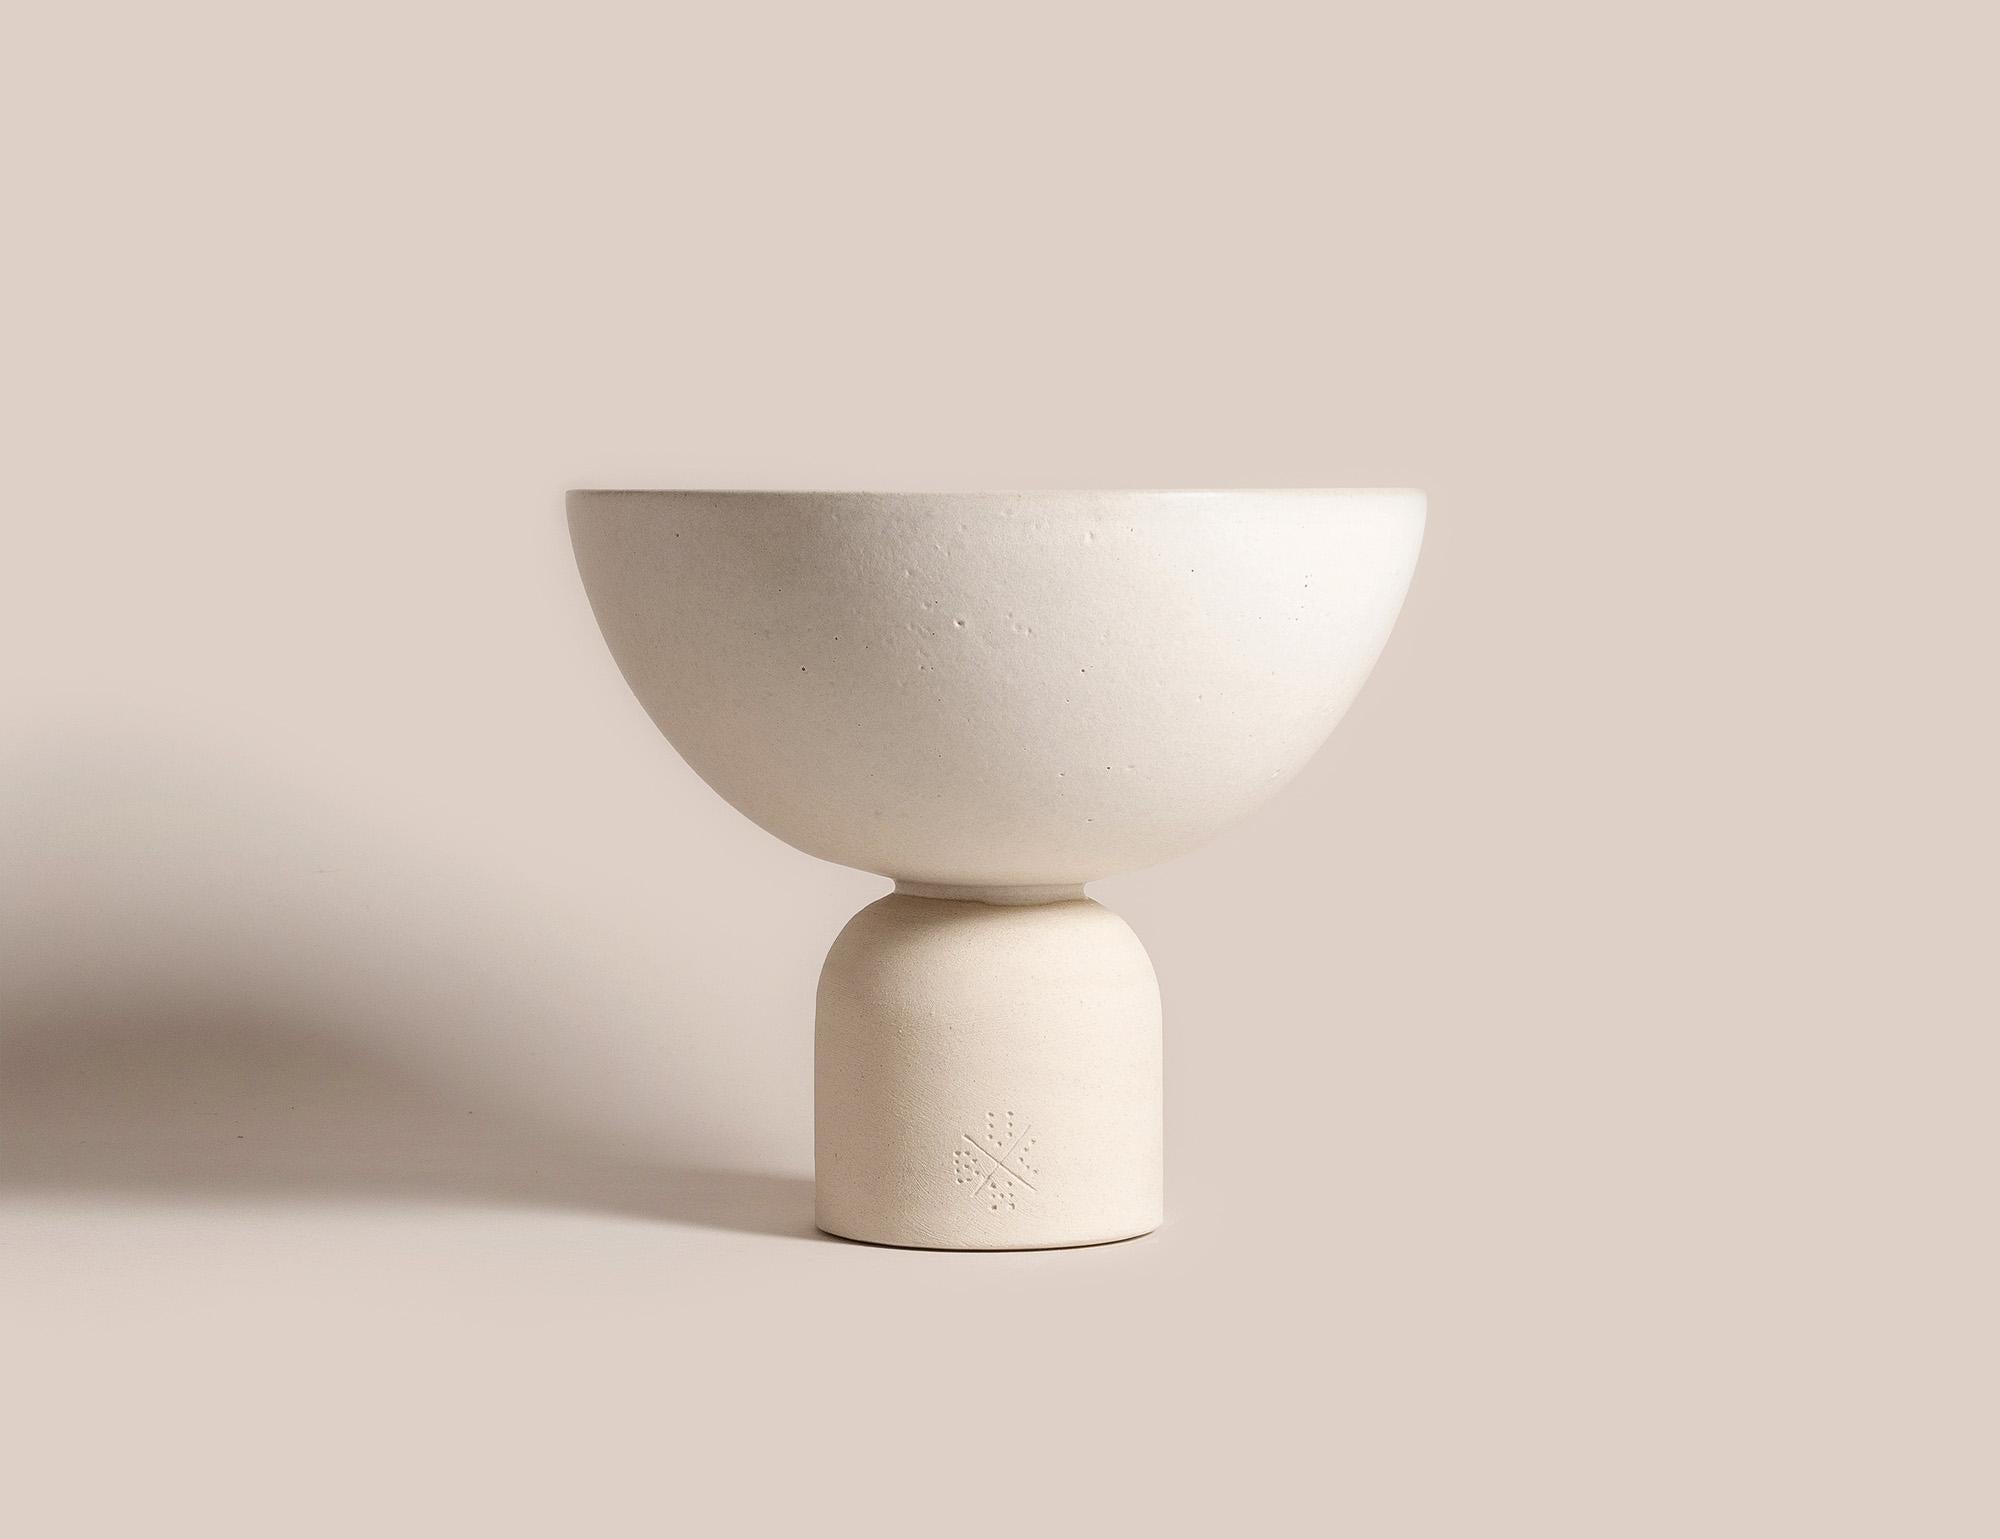 Handcrafted 015 Coupe by Lovebuch
Dimensions: Ø 21 x H 16 cm
Materials: Sandstone, Handcrafted piece

Katia works with wood and clay, these raw, powerfully expressive materials are shaped to create a poetry of objects that inhabit our daily